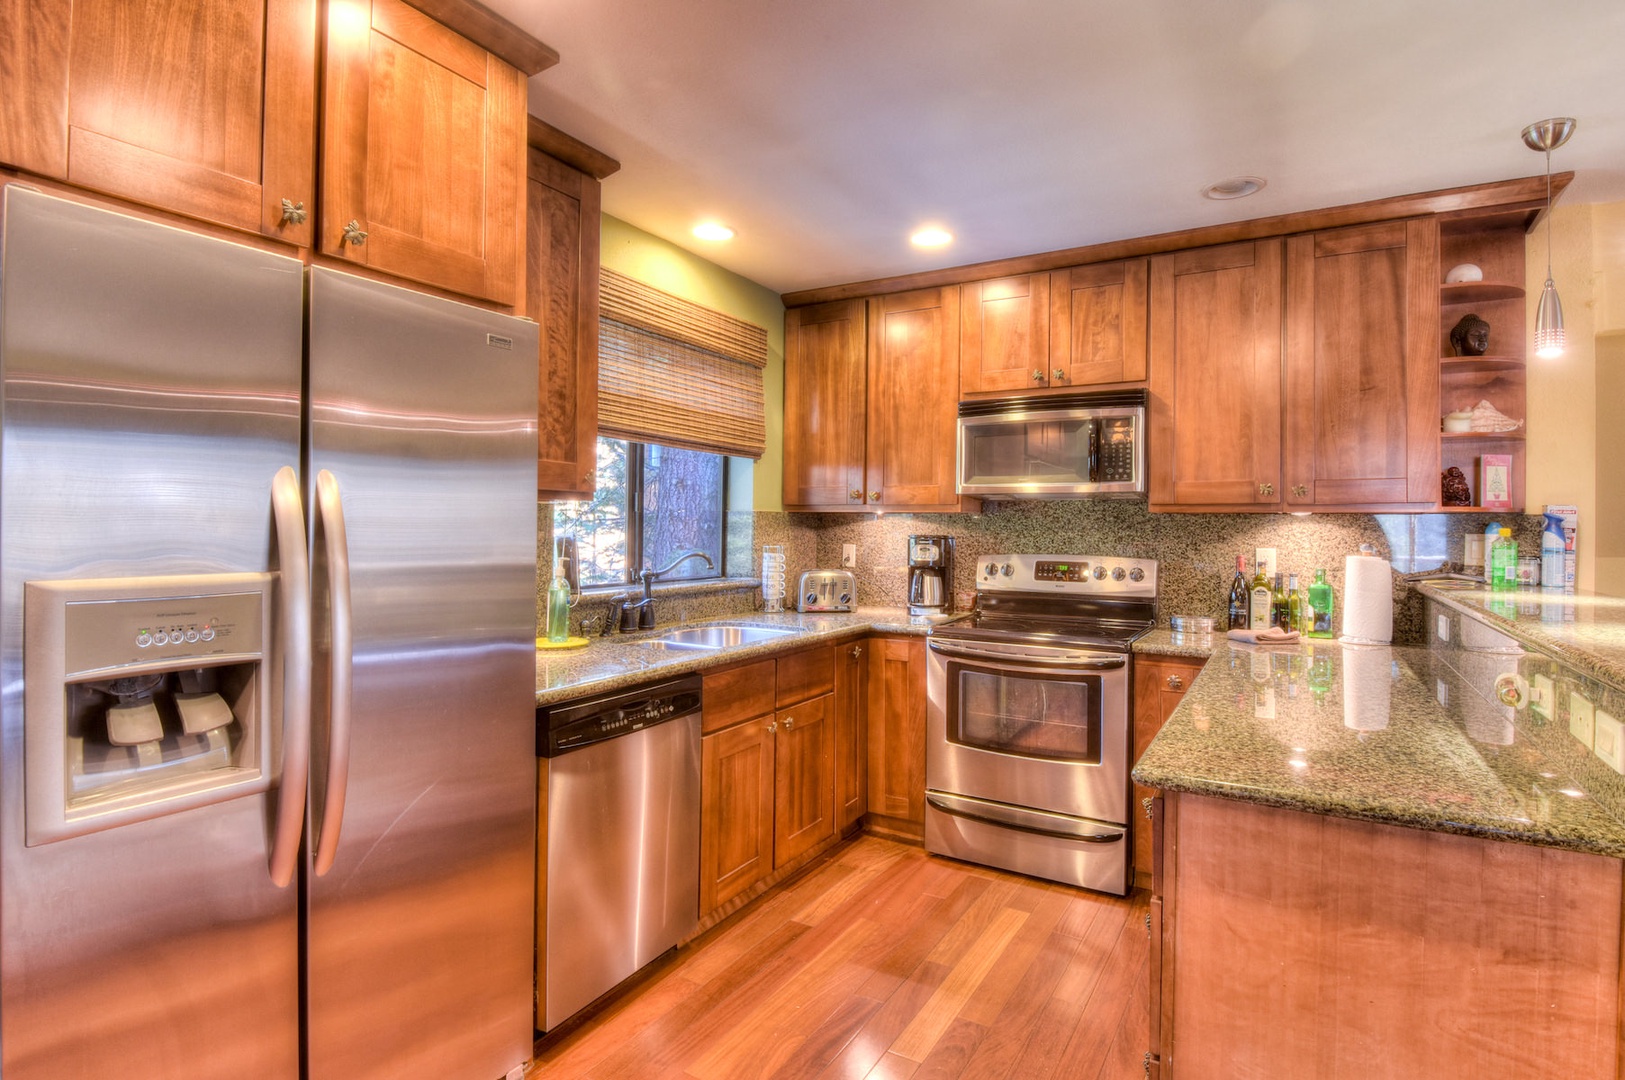 Fully equipped kitchen w/ toaster, drip coffee, and more!